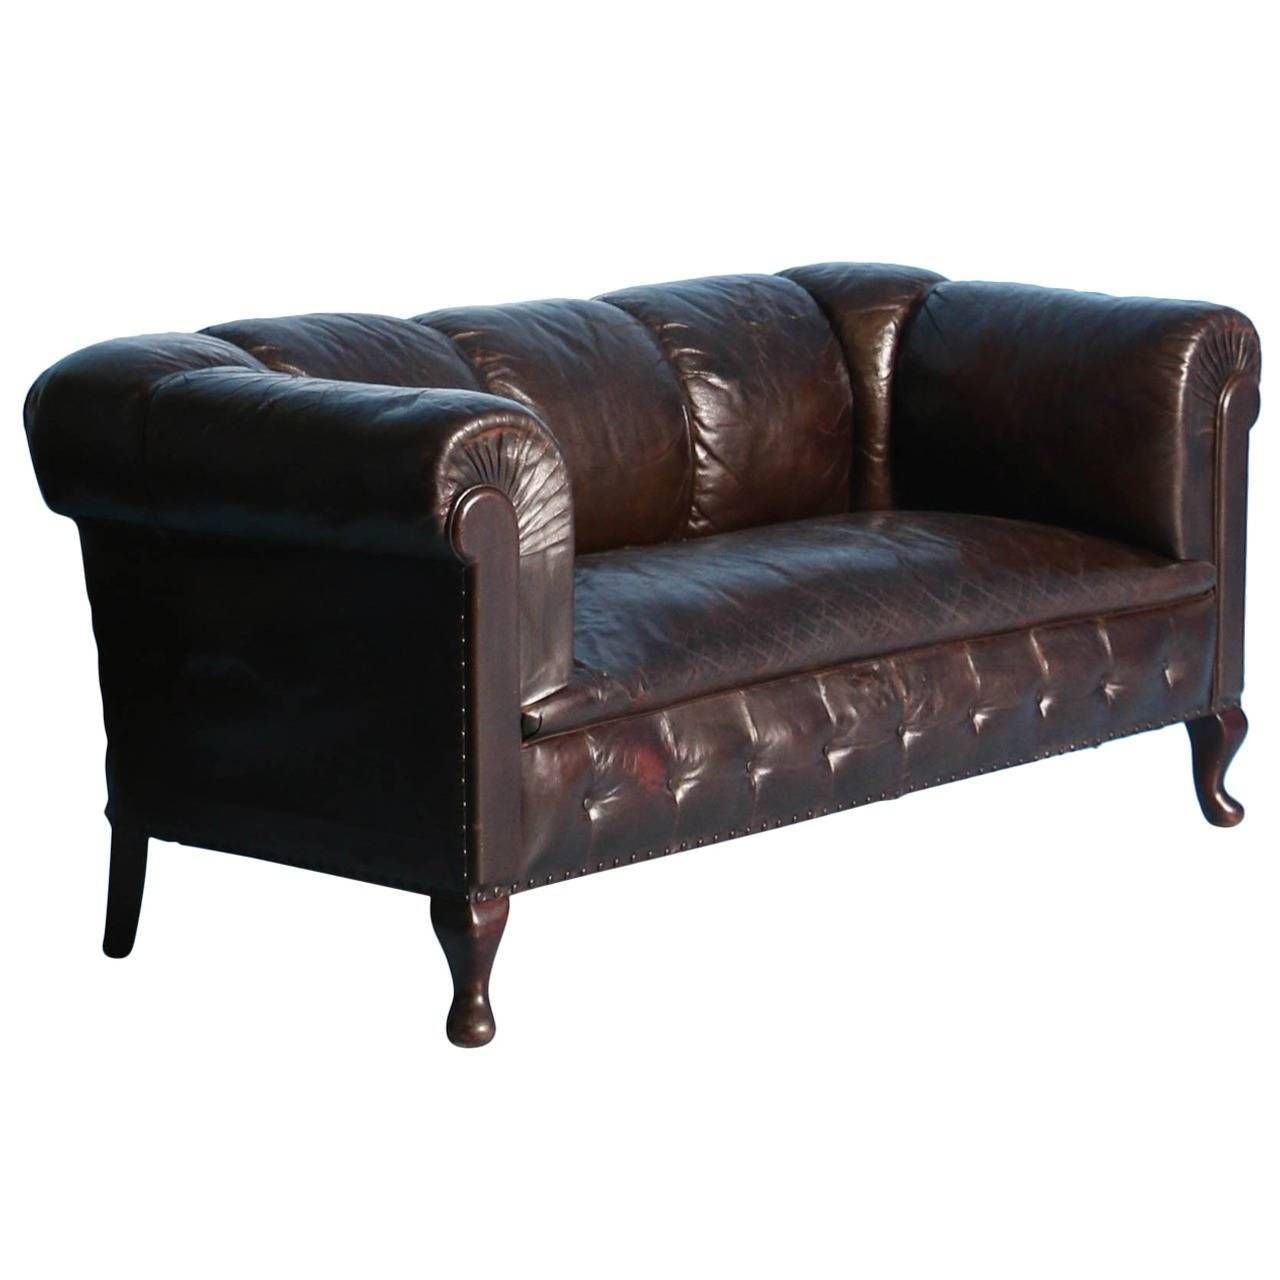 Small Vintage Chesterfield Sofa, England, Circa 1920 – 1940 At 1stdibs With Regard To Leather Chesterfield Sofas (View 24 of 30)